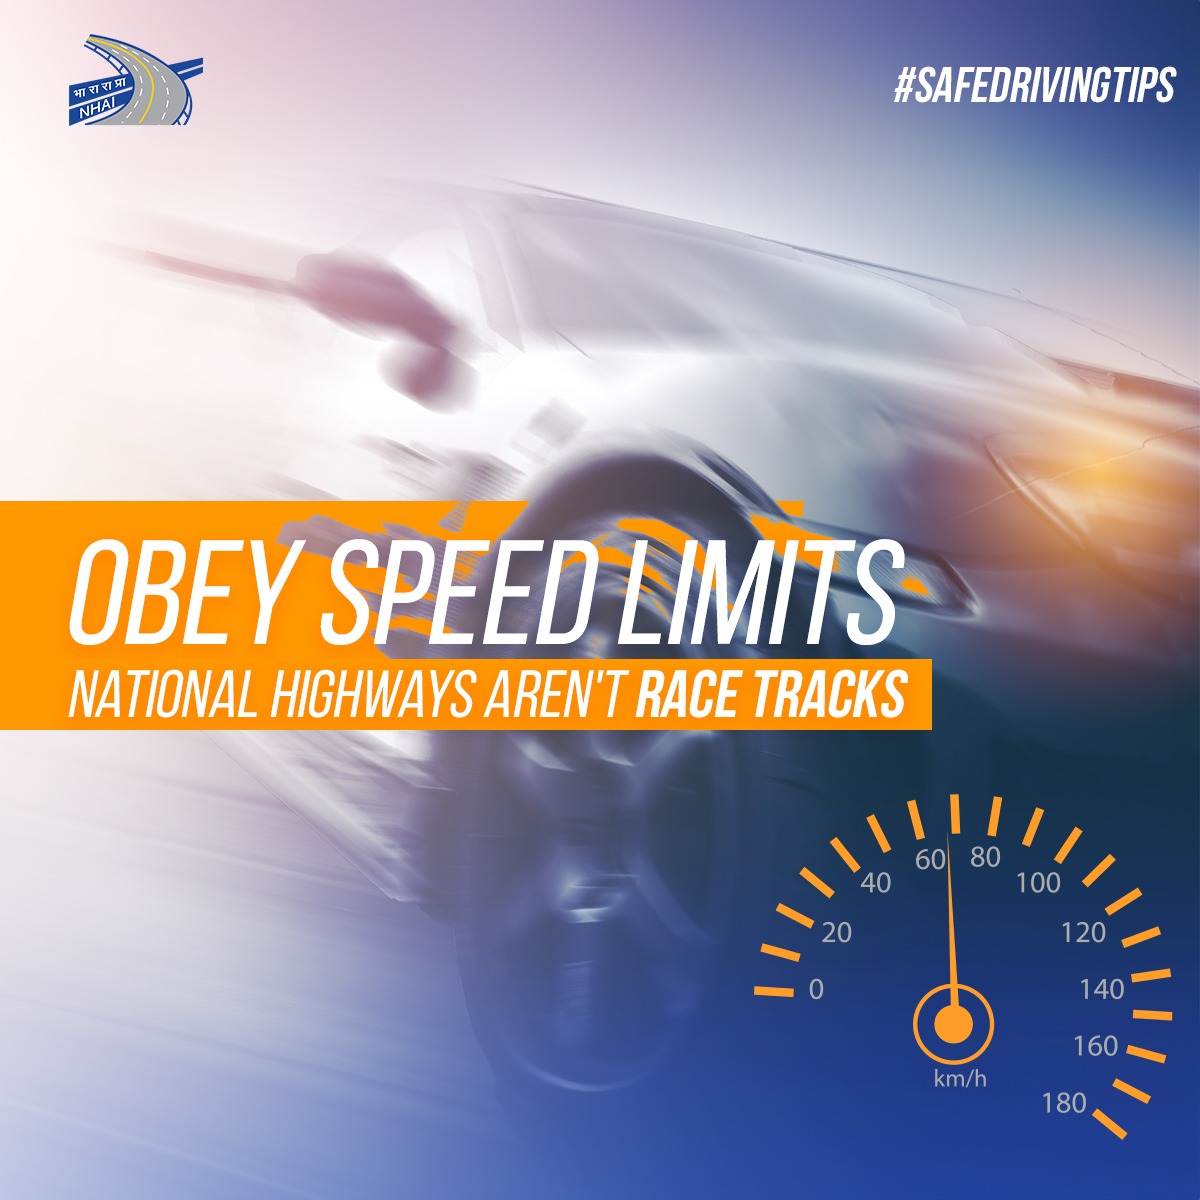 Driving within speed limits not only ensures your own safety but that of other road users as well. #ObeySpeedLimits #SafeDrivingTips #NHAI